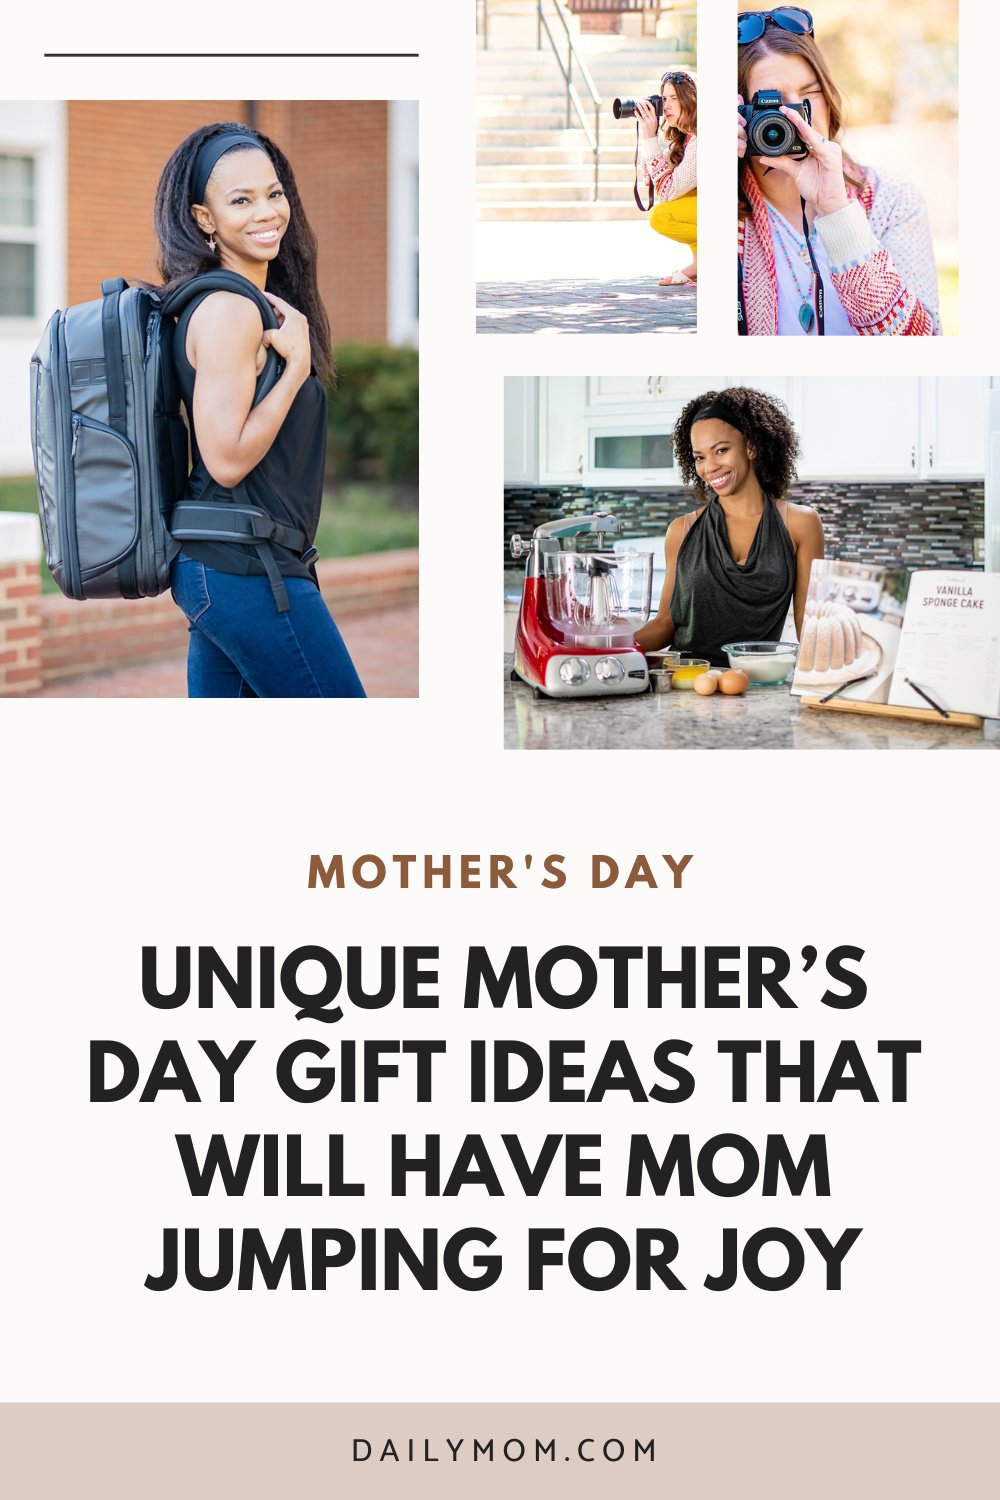 Daily Mom Parent Portal Unique Mothers Day Gift Ideas Pin